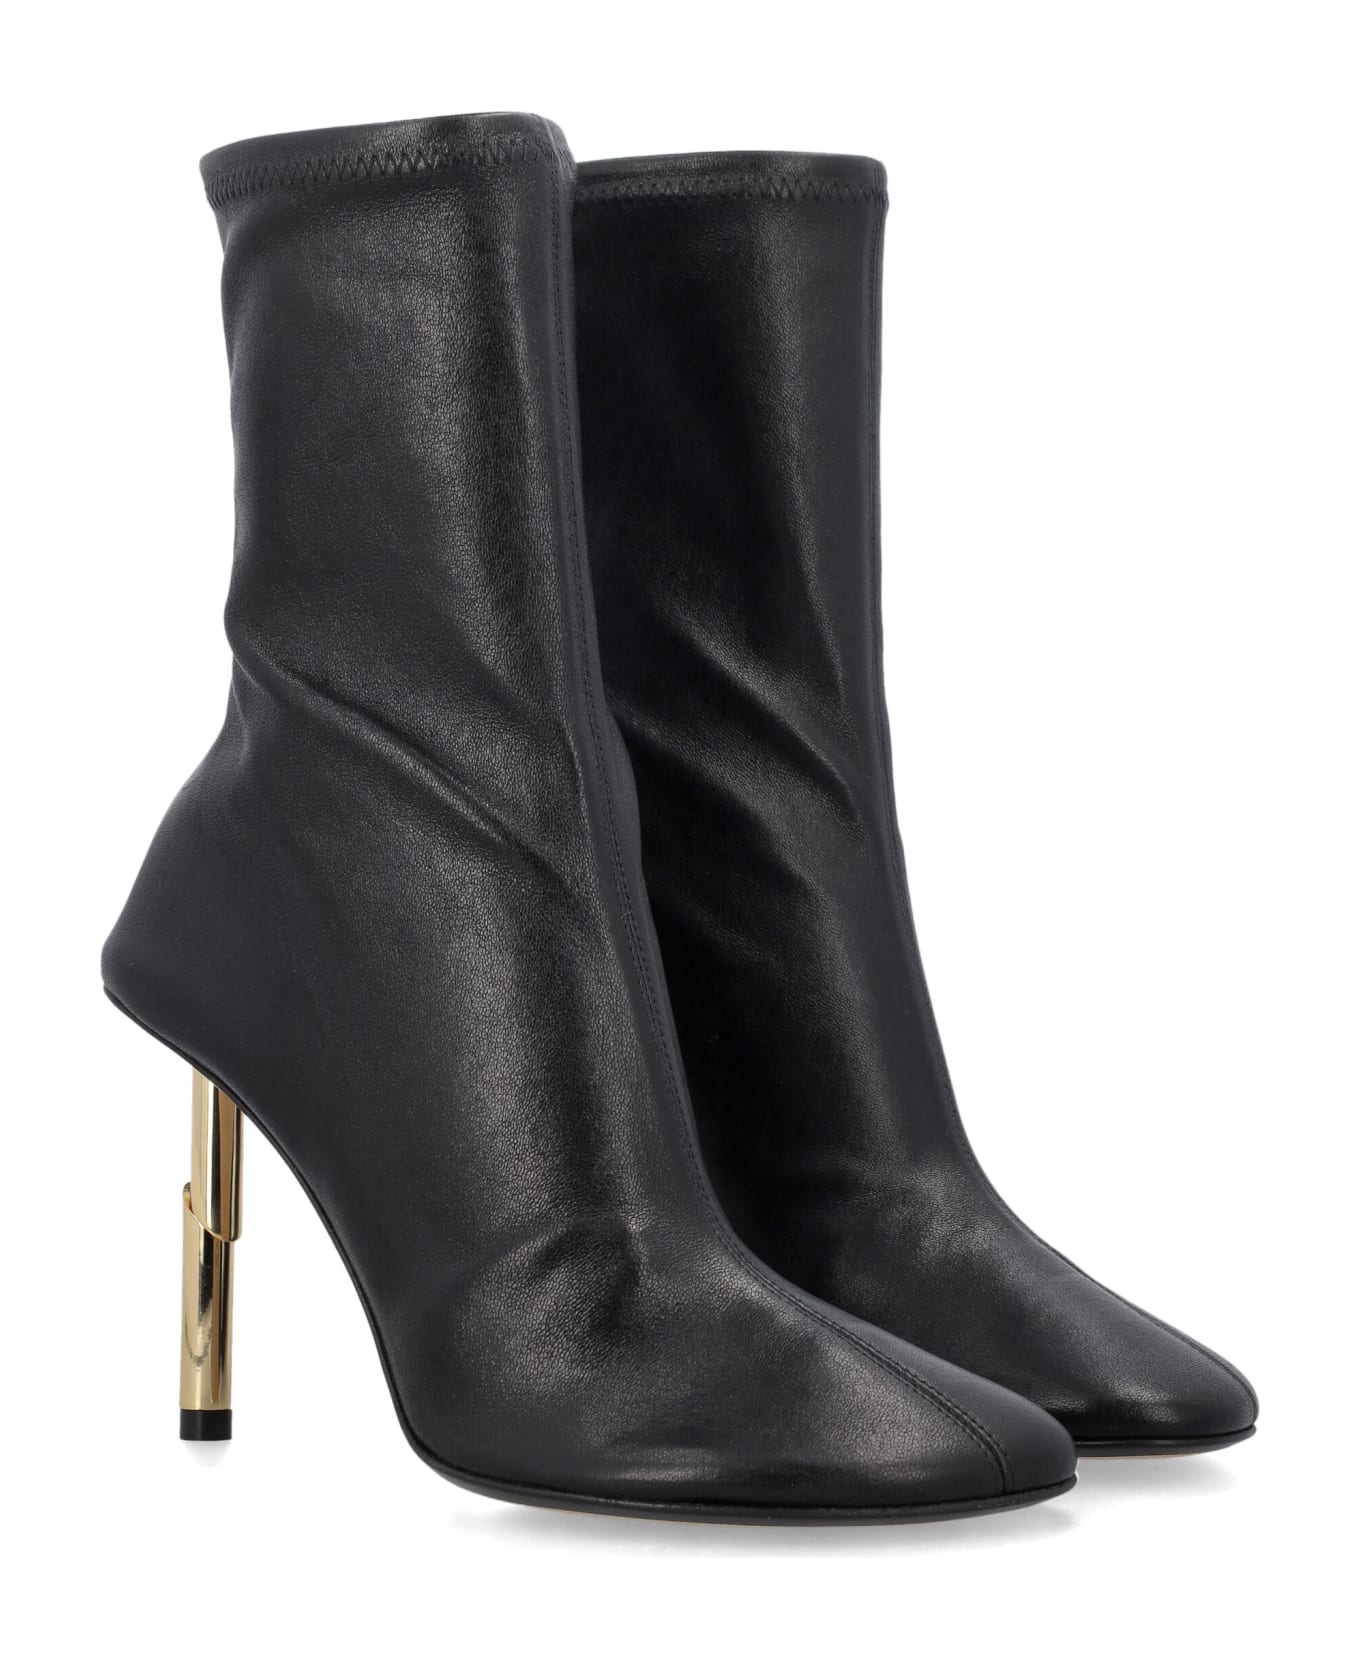 Lanvin Sequence Ankle Boots - BLACK